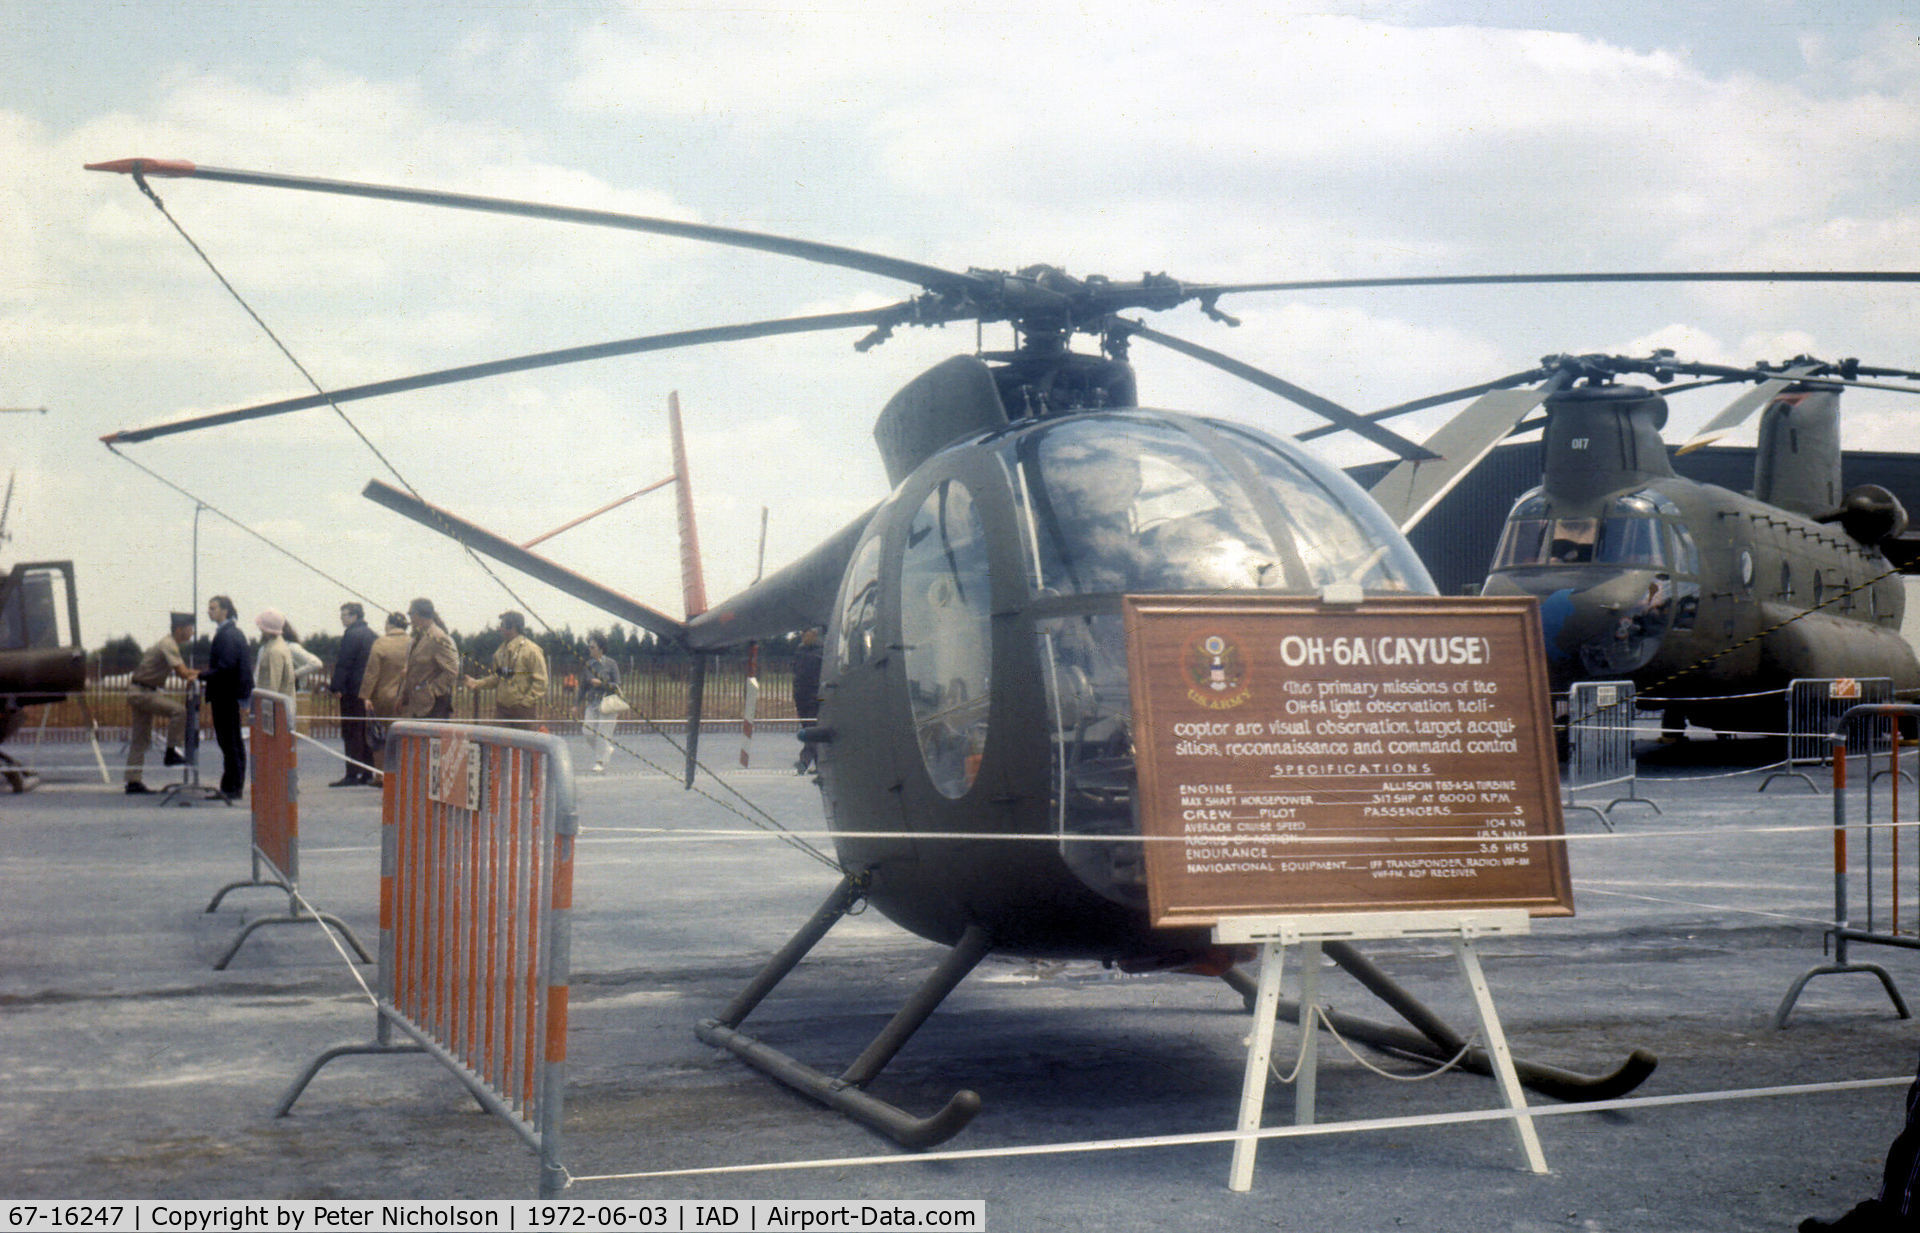 67-16247, 1968 Hughes OH-6A Cayuse C/N 0632, OH-6A Cayuse on display in the static park of the Transpo 72 show at Dulles International Airport in June 1972.